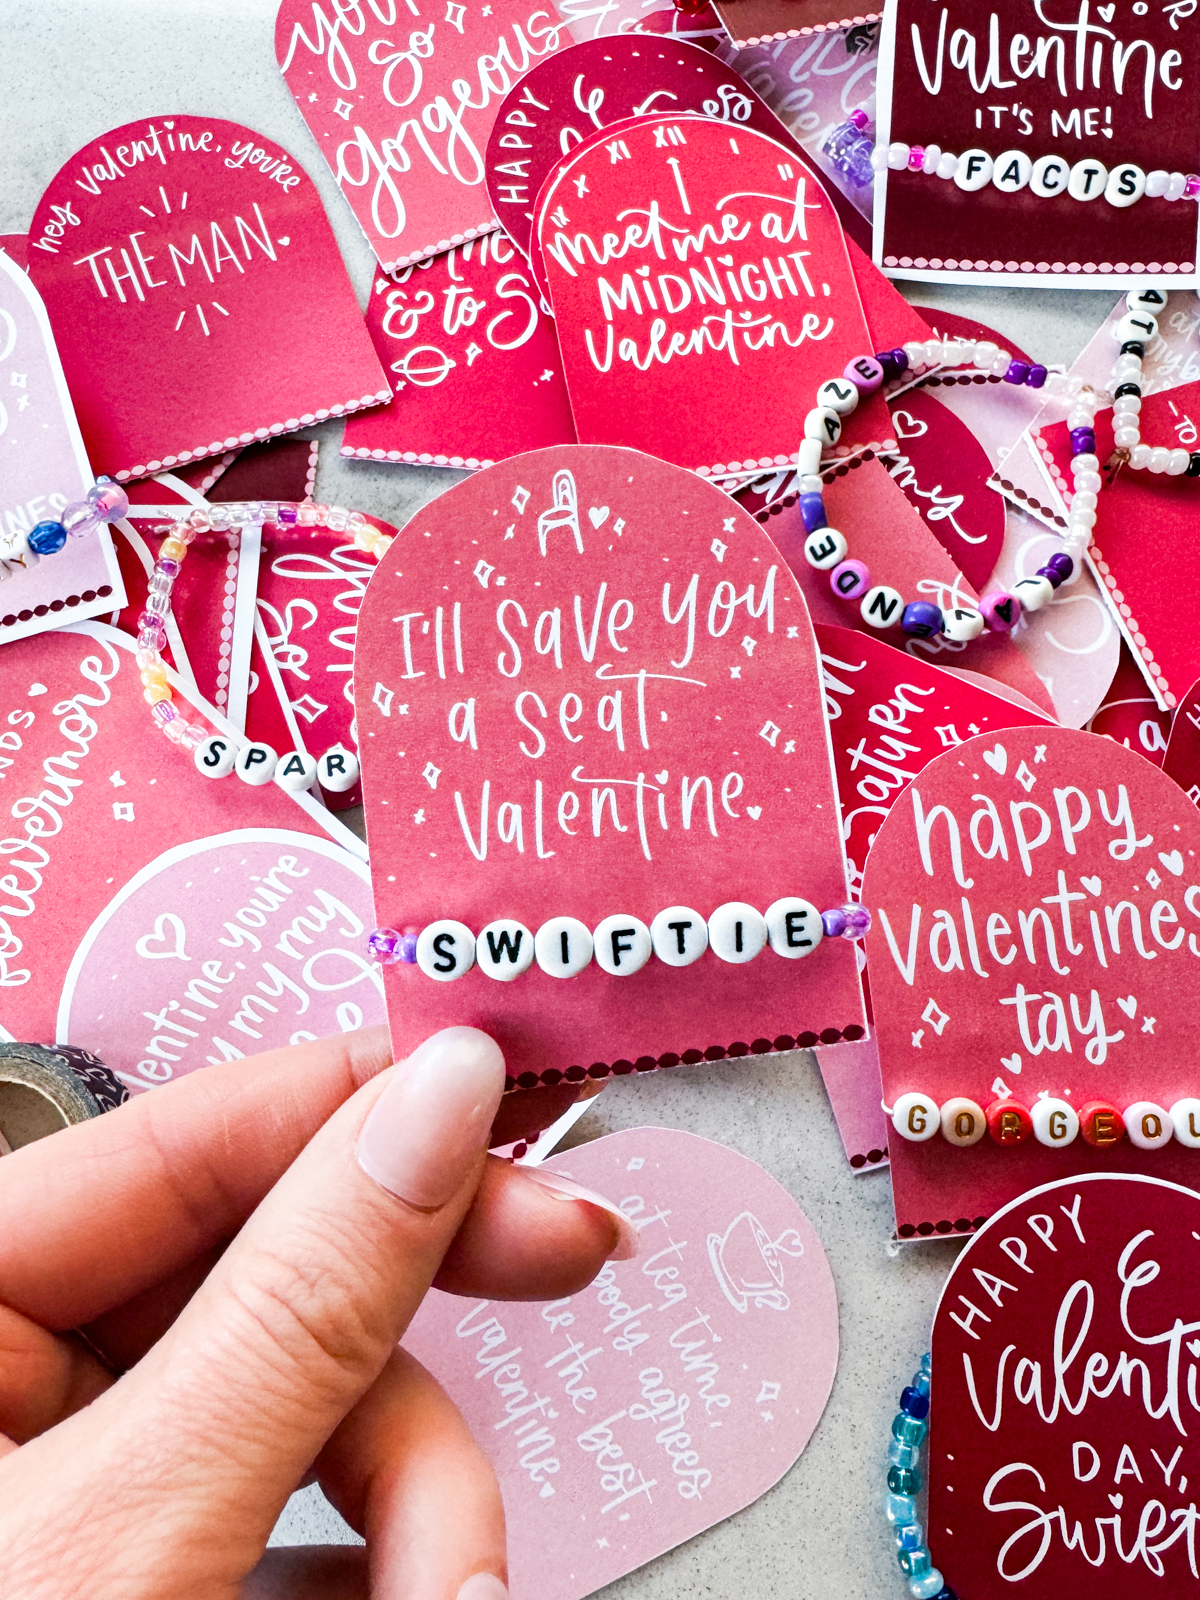 taylor swift themed valentines day cards printed and cut to size (pink and deep burgundy color with white hand lettered song lyrics) shown on marble countertop with beaded friendship bracelets. held valentine reads: i'll save you a seat, valentine with a 'swiftie' bracelet.